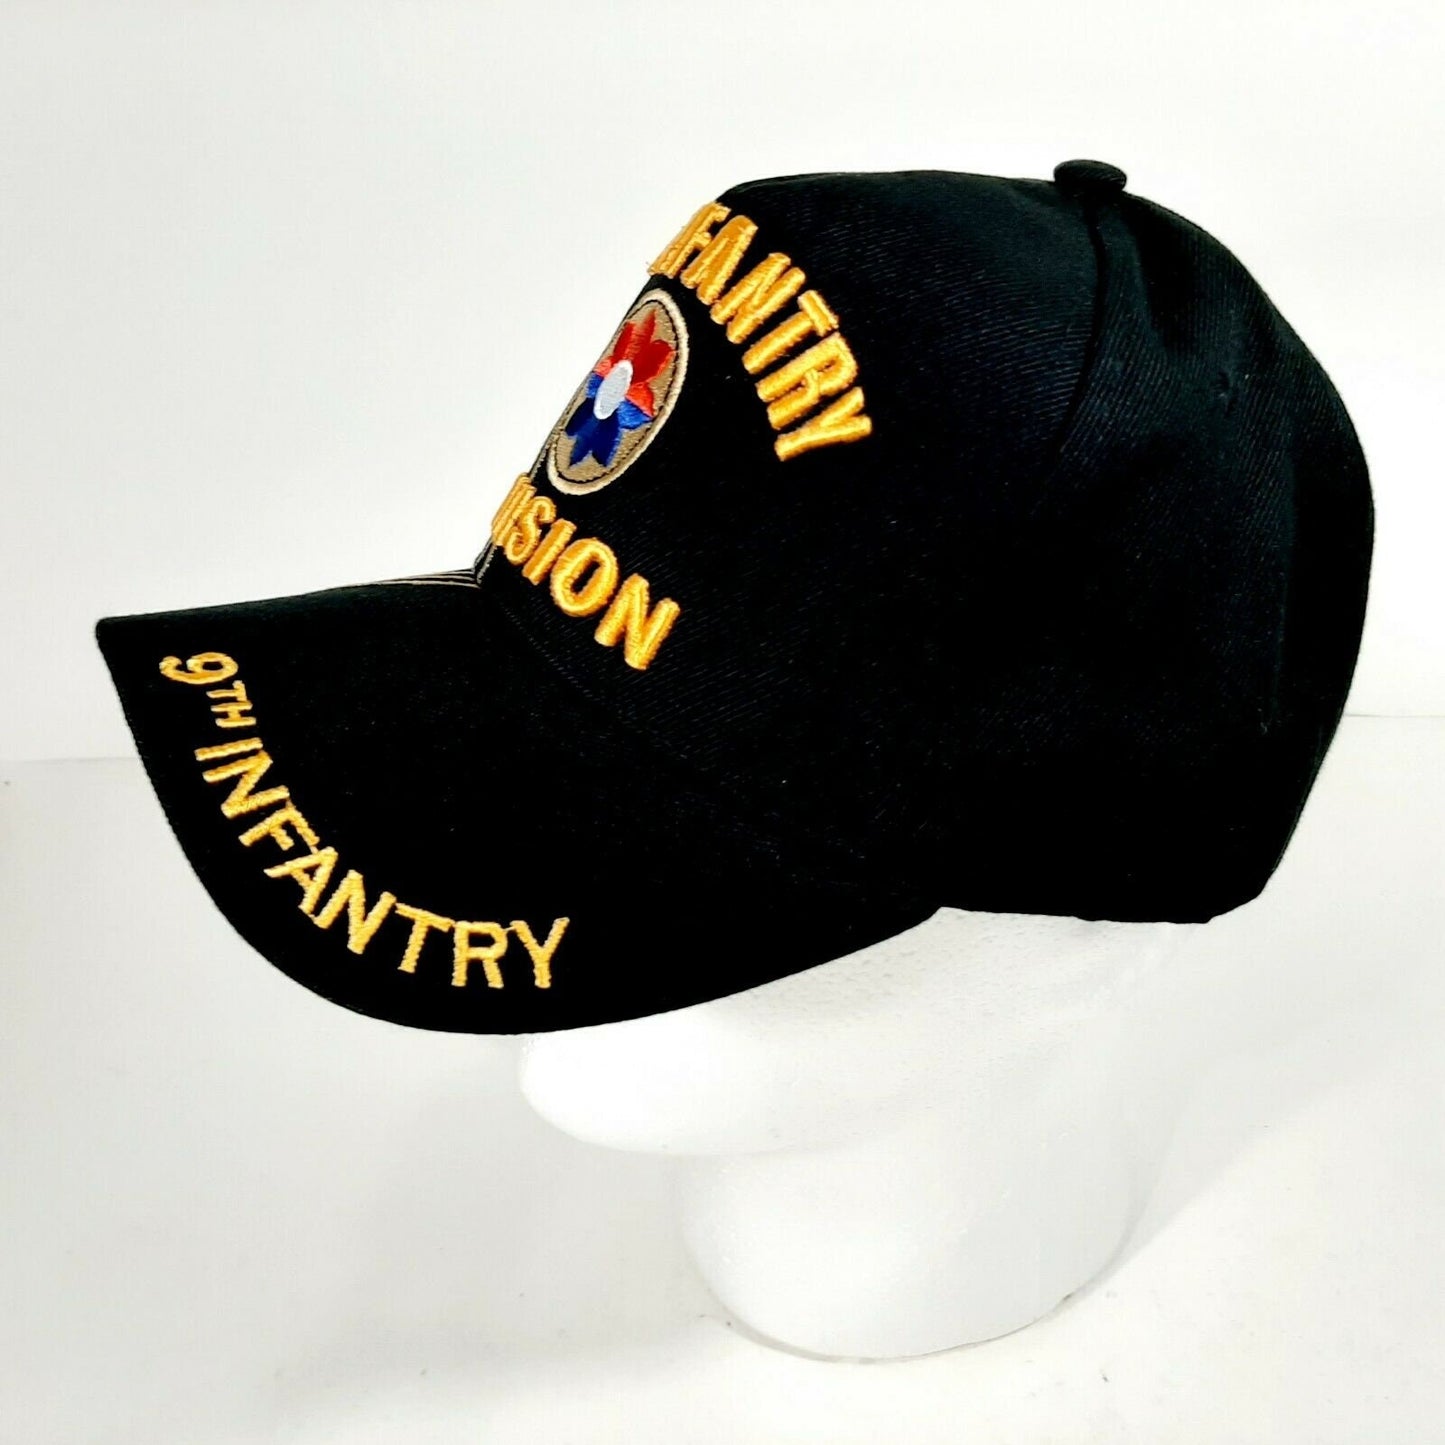 US Army 9th Infantry Division Men's Ball Cap Hat Black Embroidered Acrylic